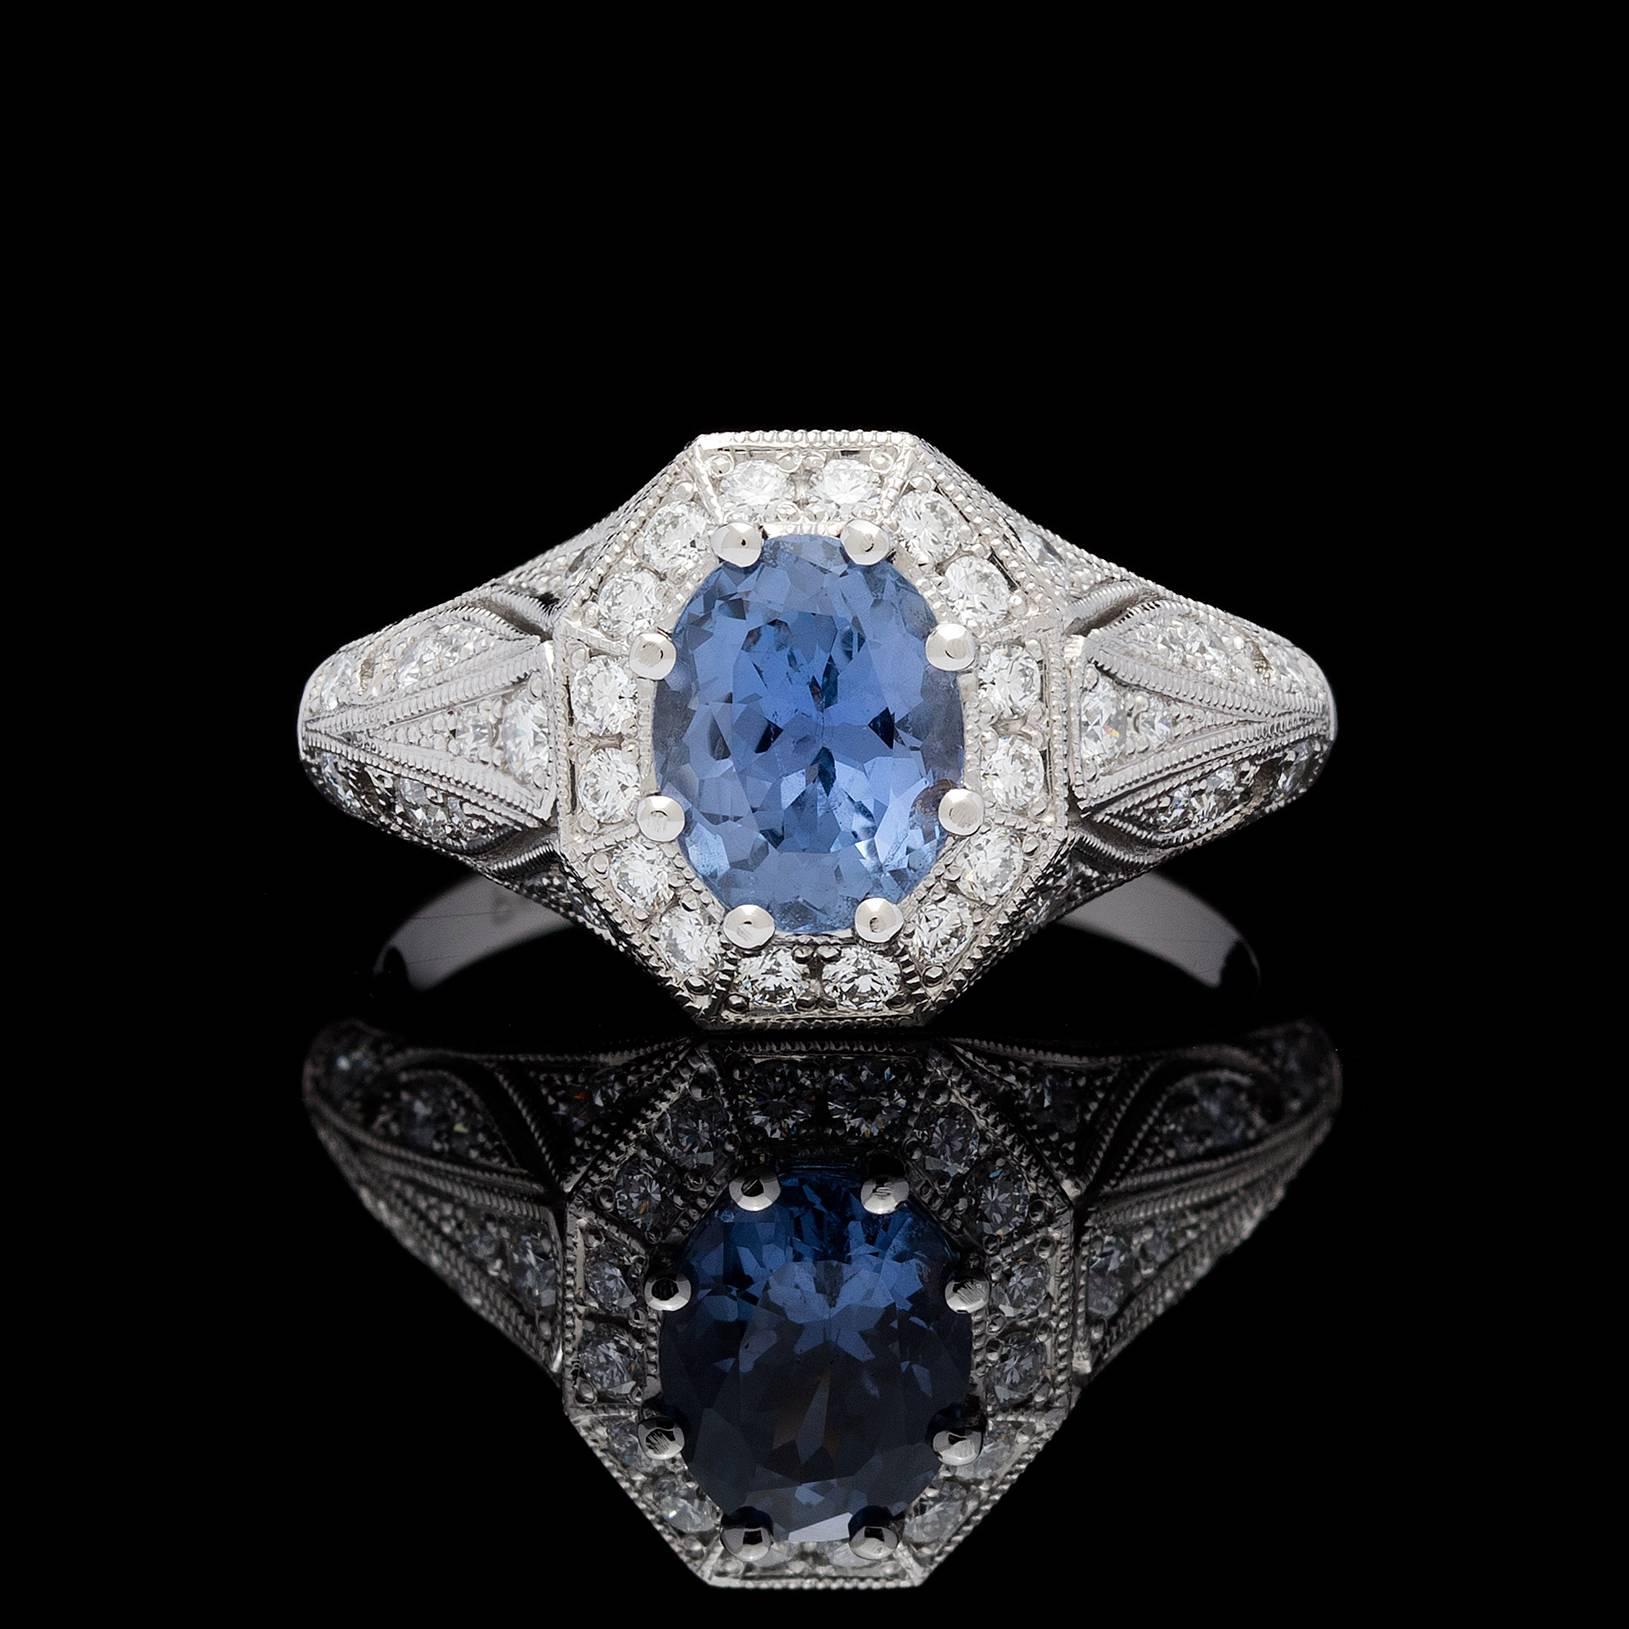 This ring features a 1.50 carats oval mixed brilliant-cut sapphire with a blue-violet to purple color-change phenomenon characteristic. The sapphire is accompanied by GIA report # 2101710491. Top face of the ring is octagonal in shape detailed with